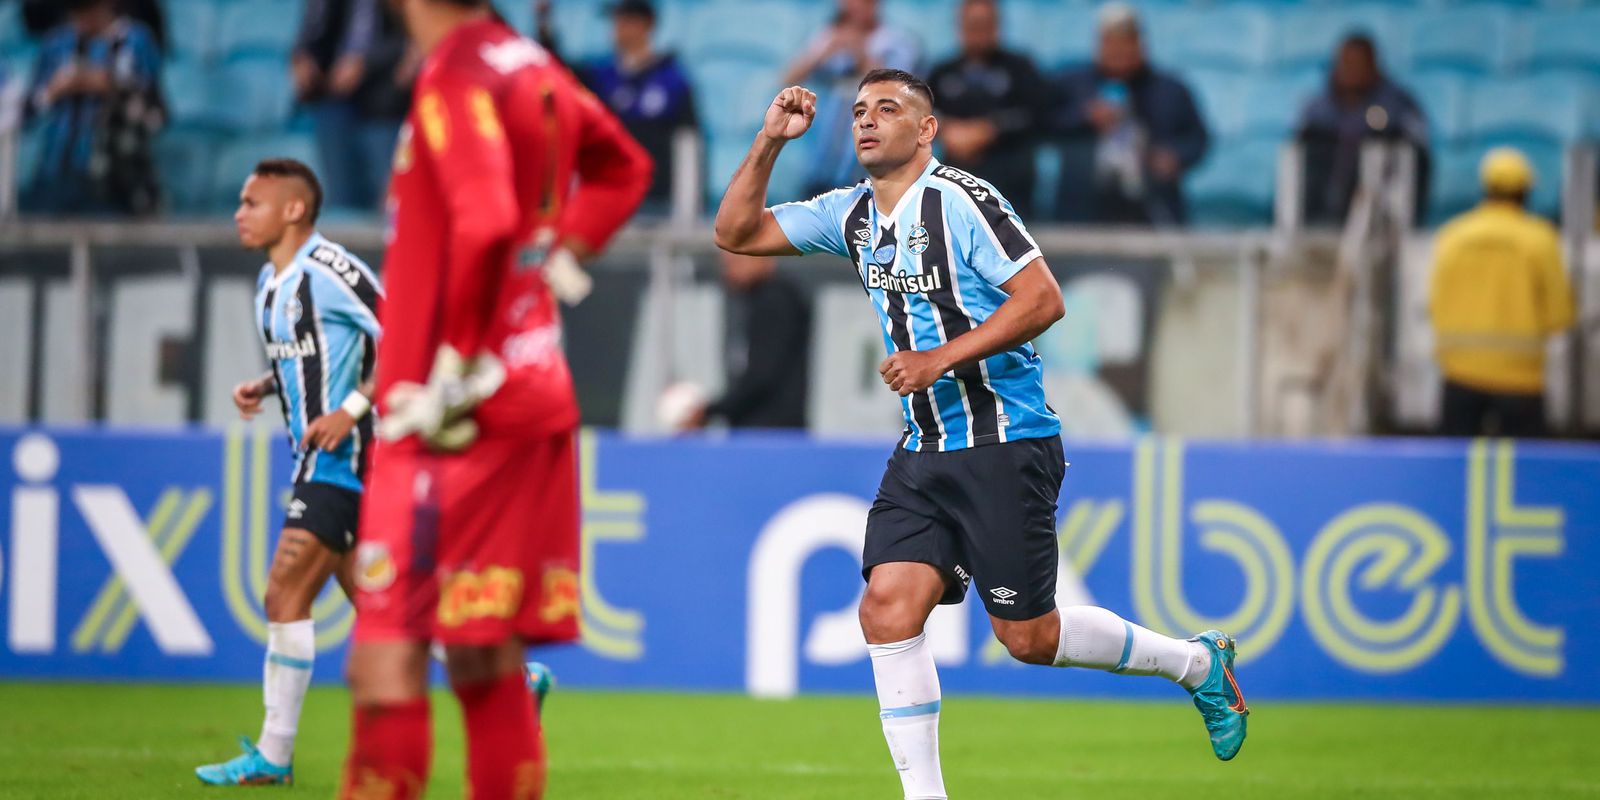 Grêmio ends a fast of victories and approaches the G4 of Serie B